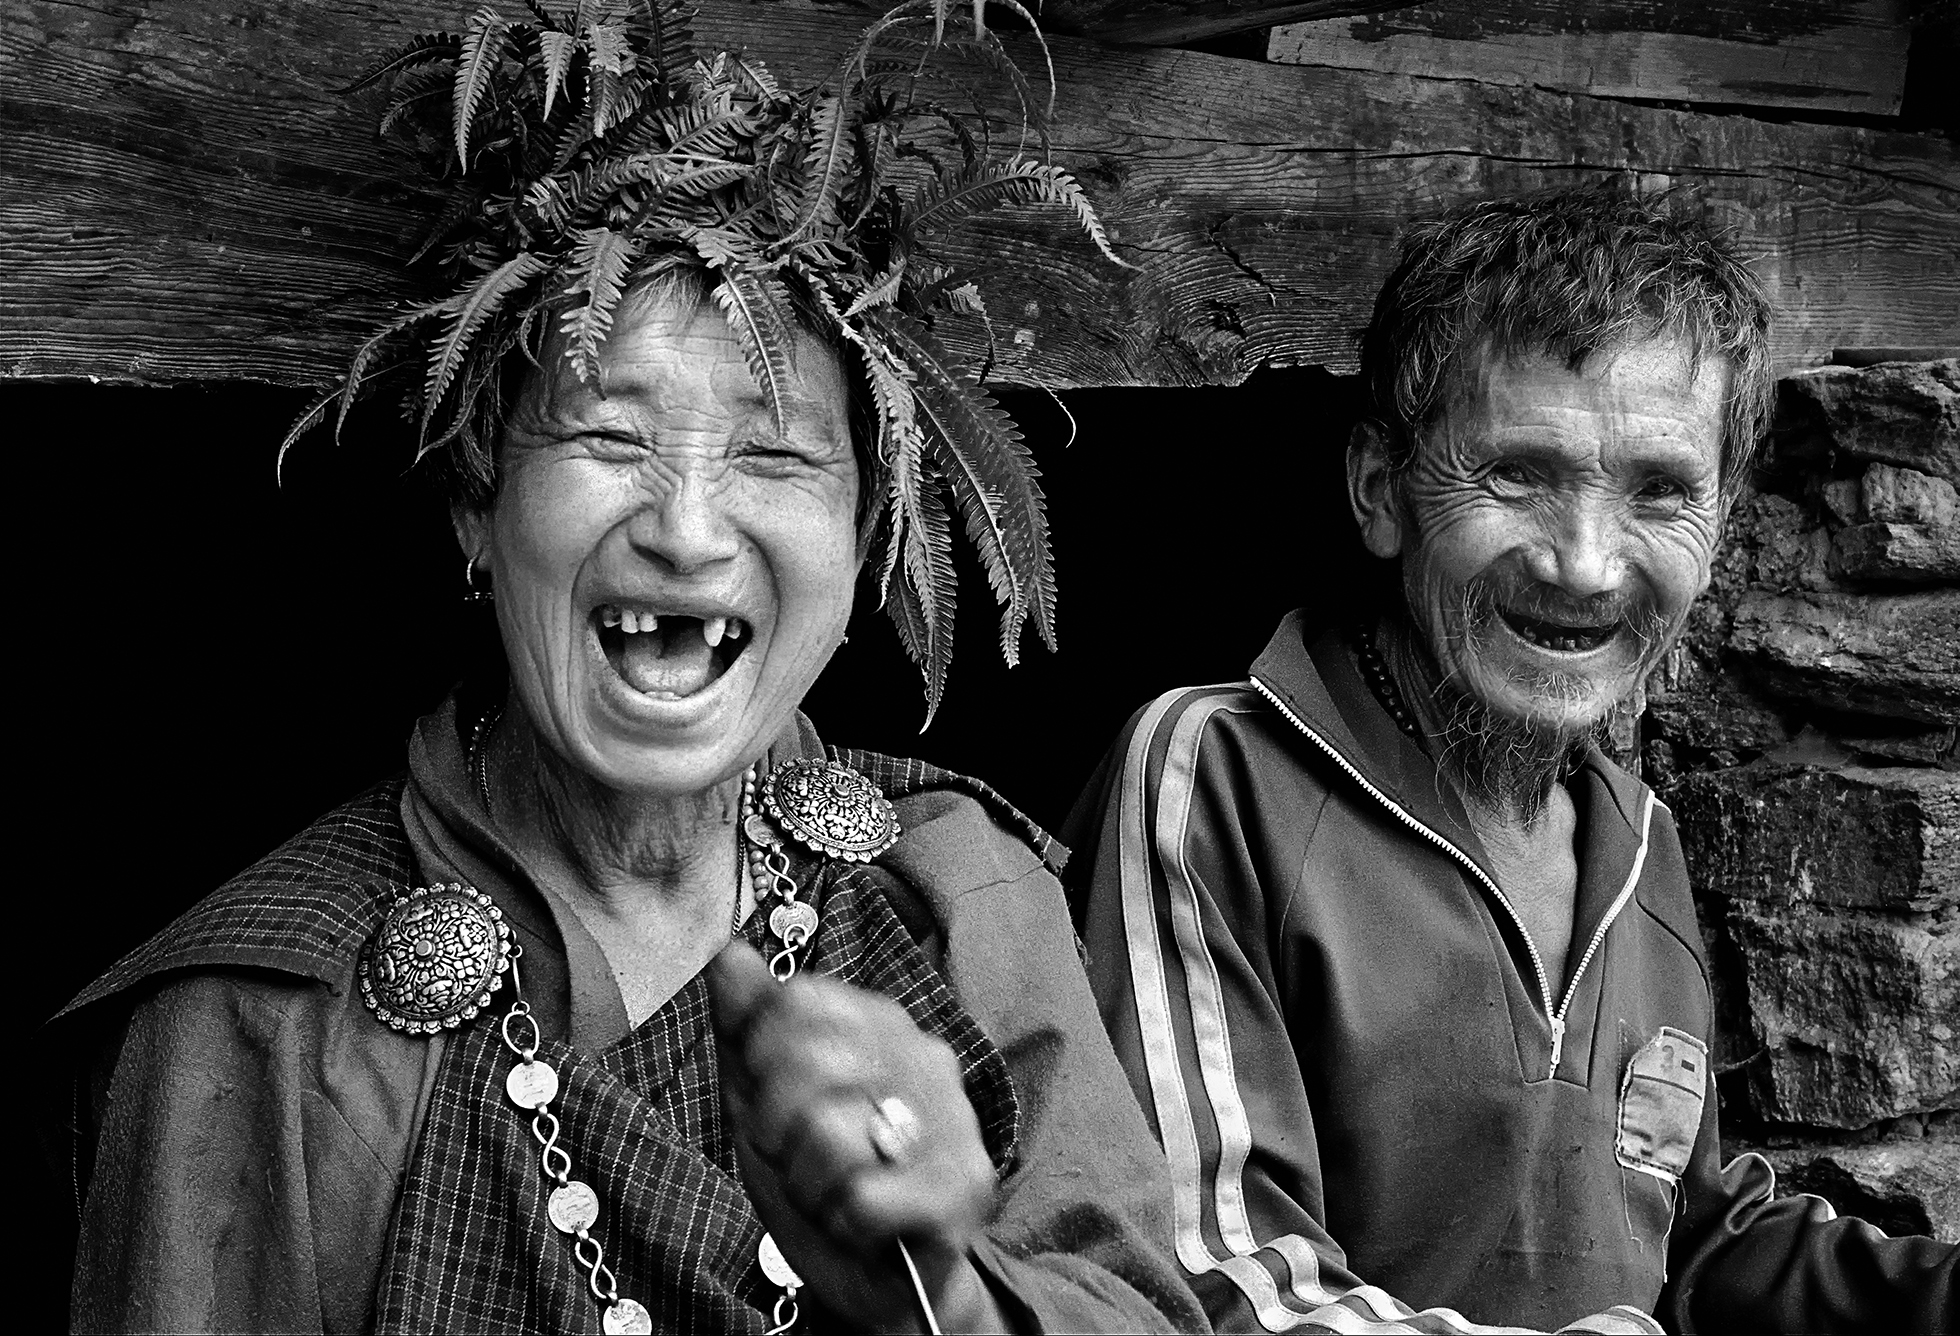 An old Bhutanese couple. The woman is in traditional clothing and is laughing, showing her missing front teeth. Next to her, her husband is also laughing but he’s wearing more modern clothing.